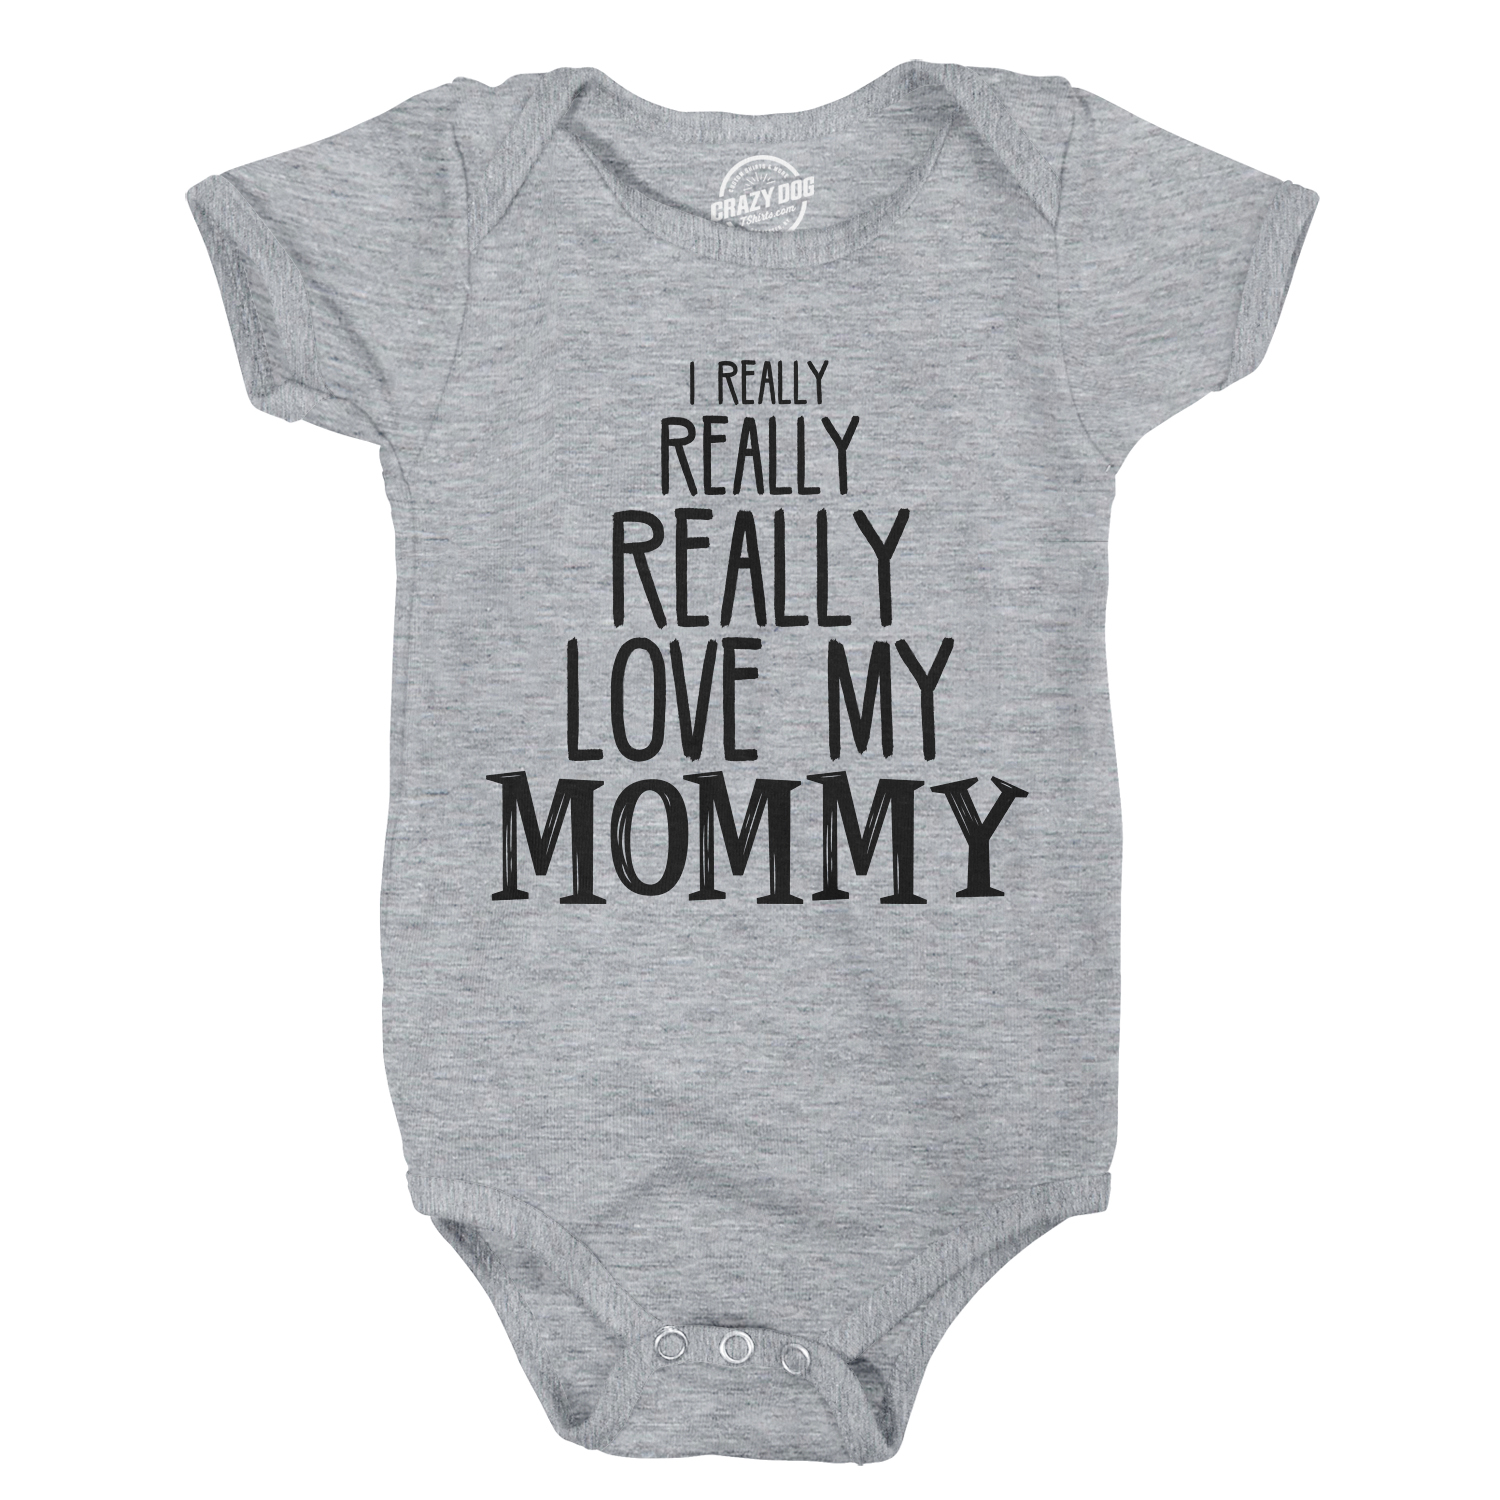 Crazy Dog Tshirts Baby Really Really Love My Mommy Cute Funny Infant Creeper Bodysuit